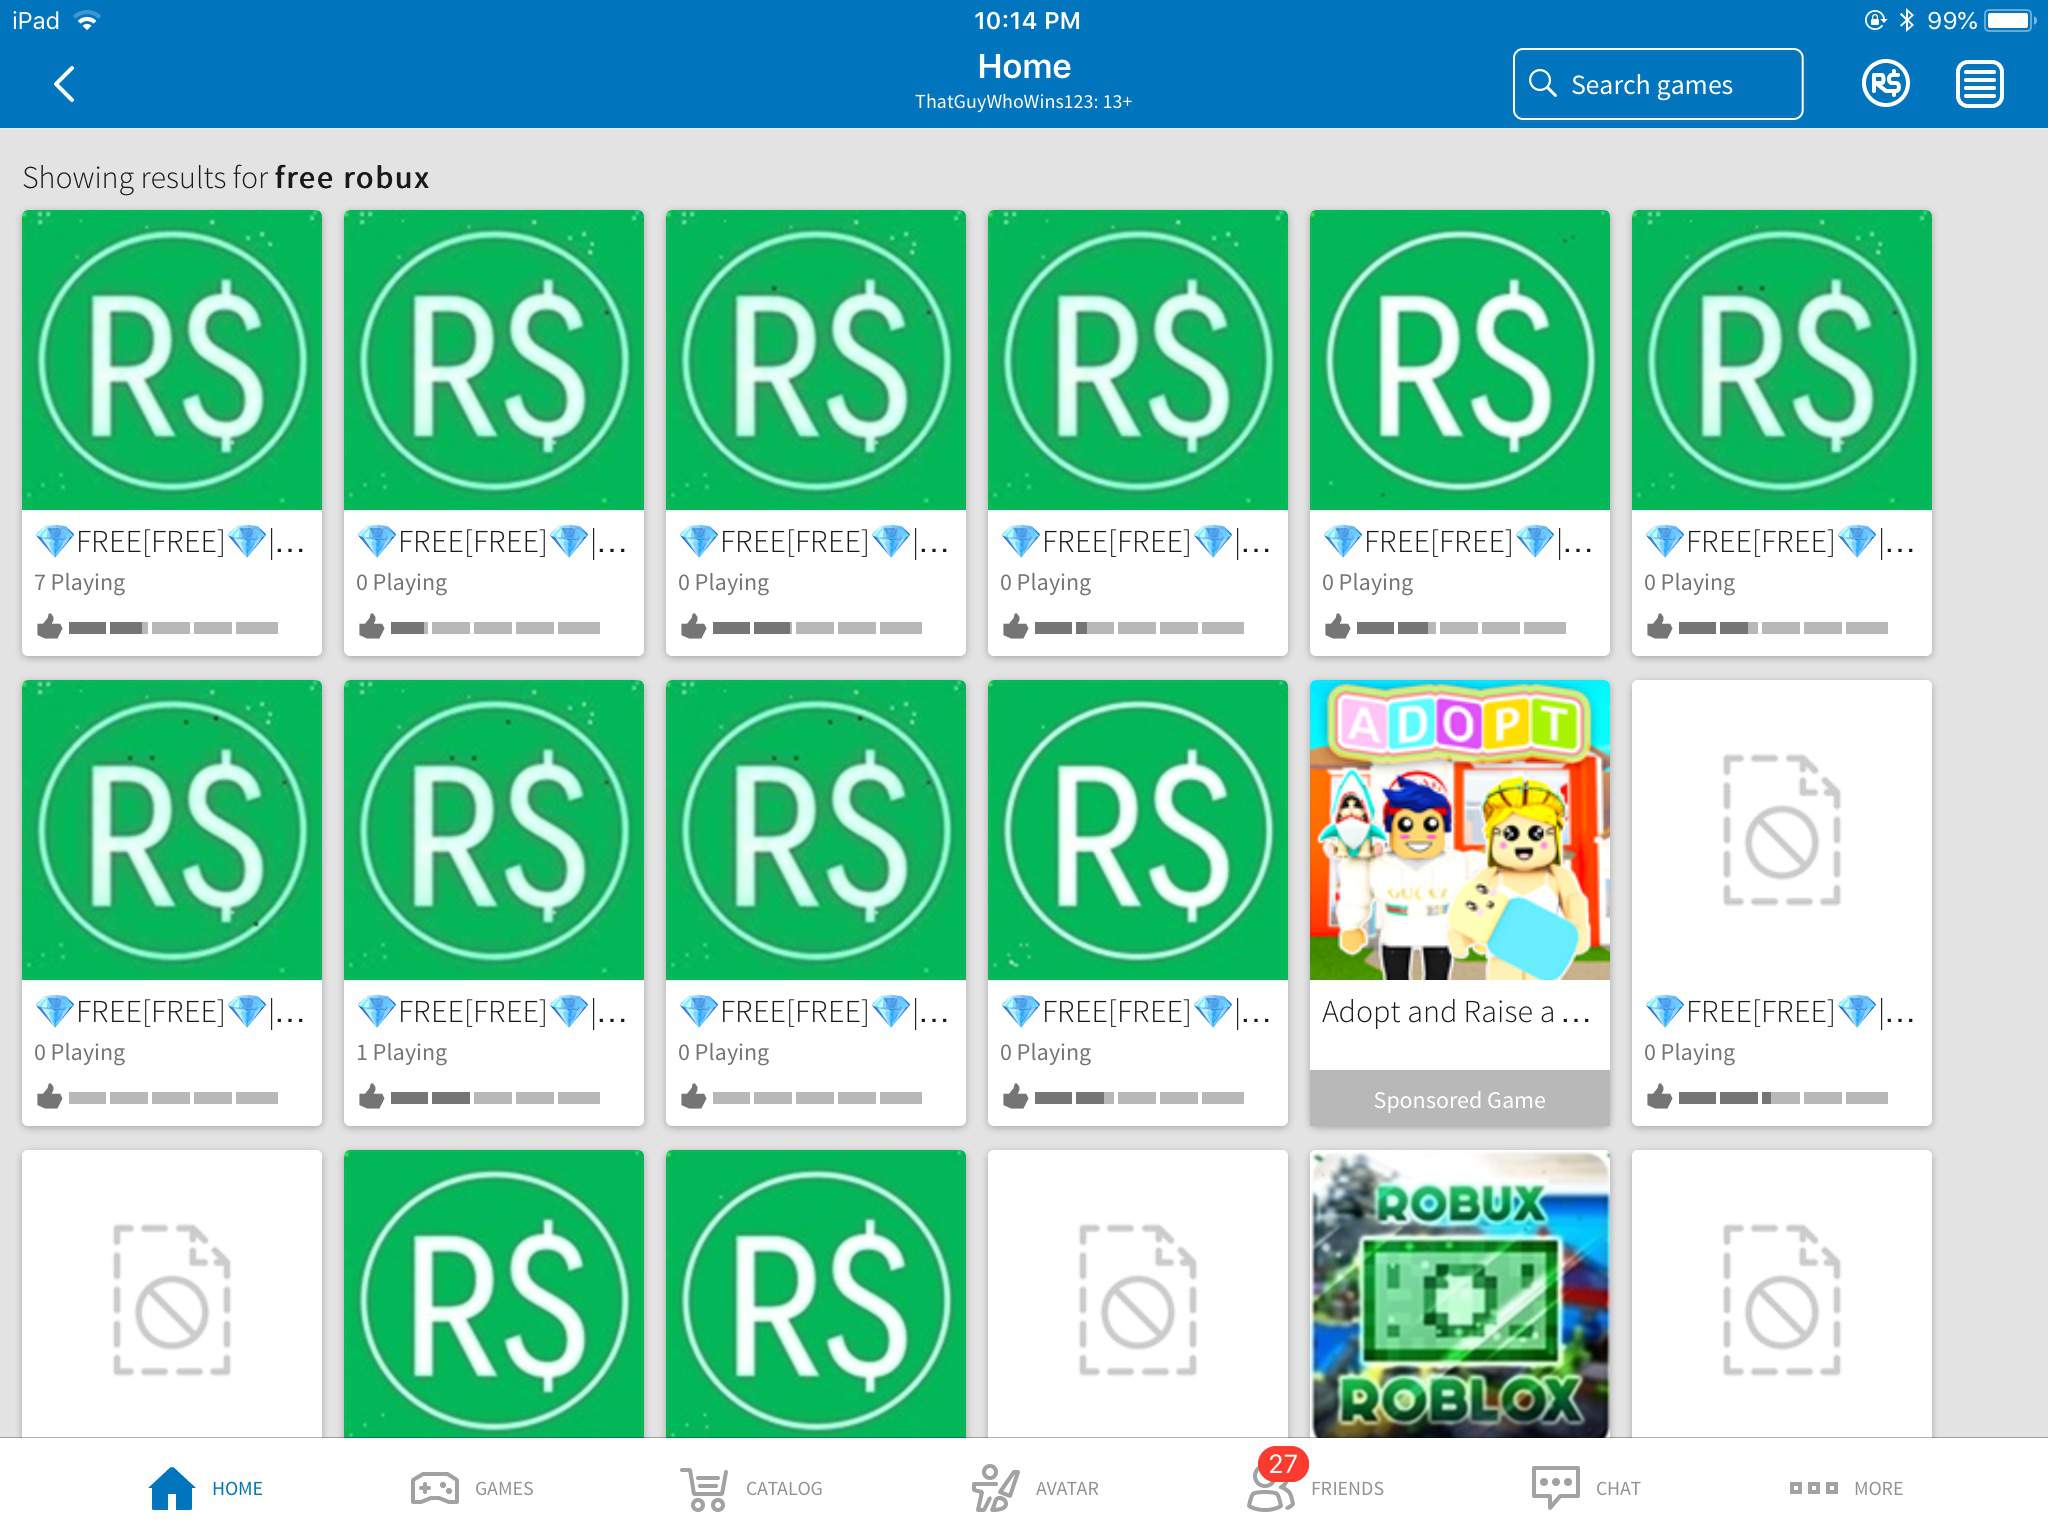 How To Get Free Robux On The Roblox App